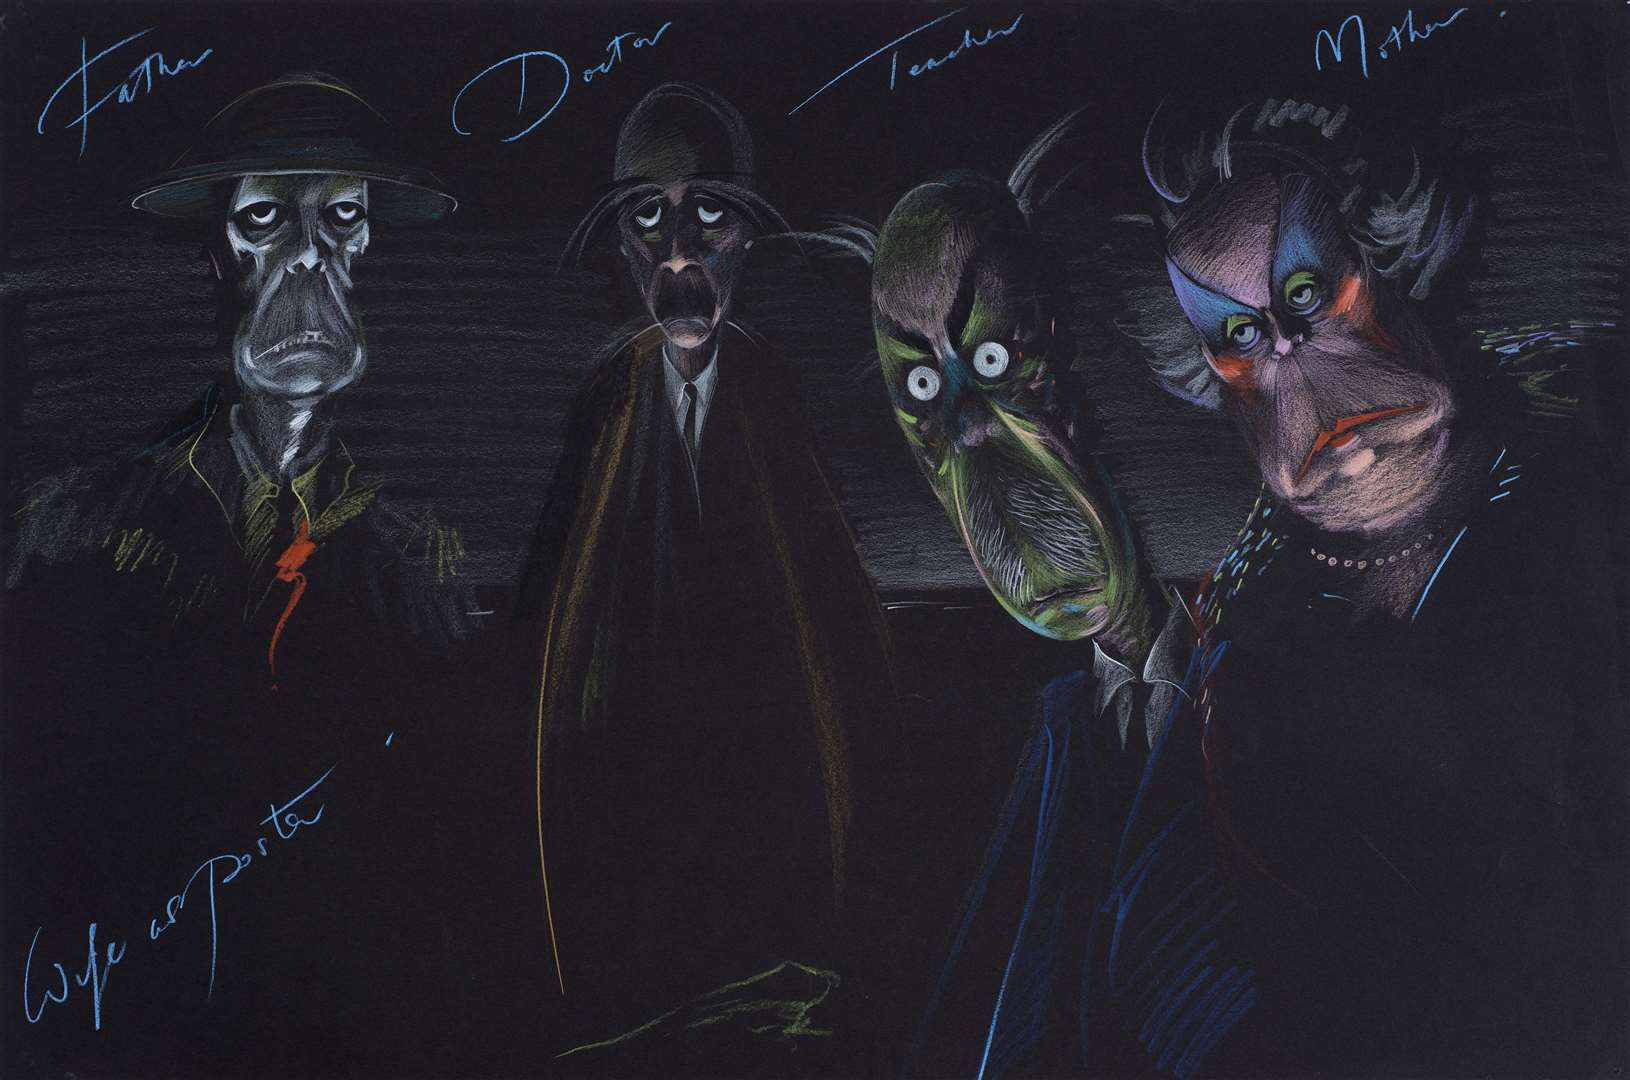 Pink Floyd The Wall by Gerald Scarfe